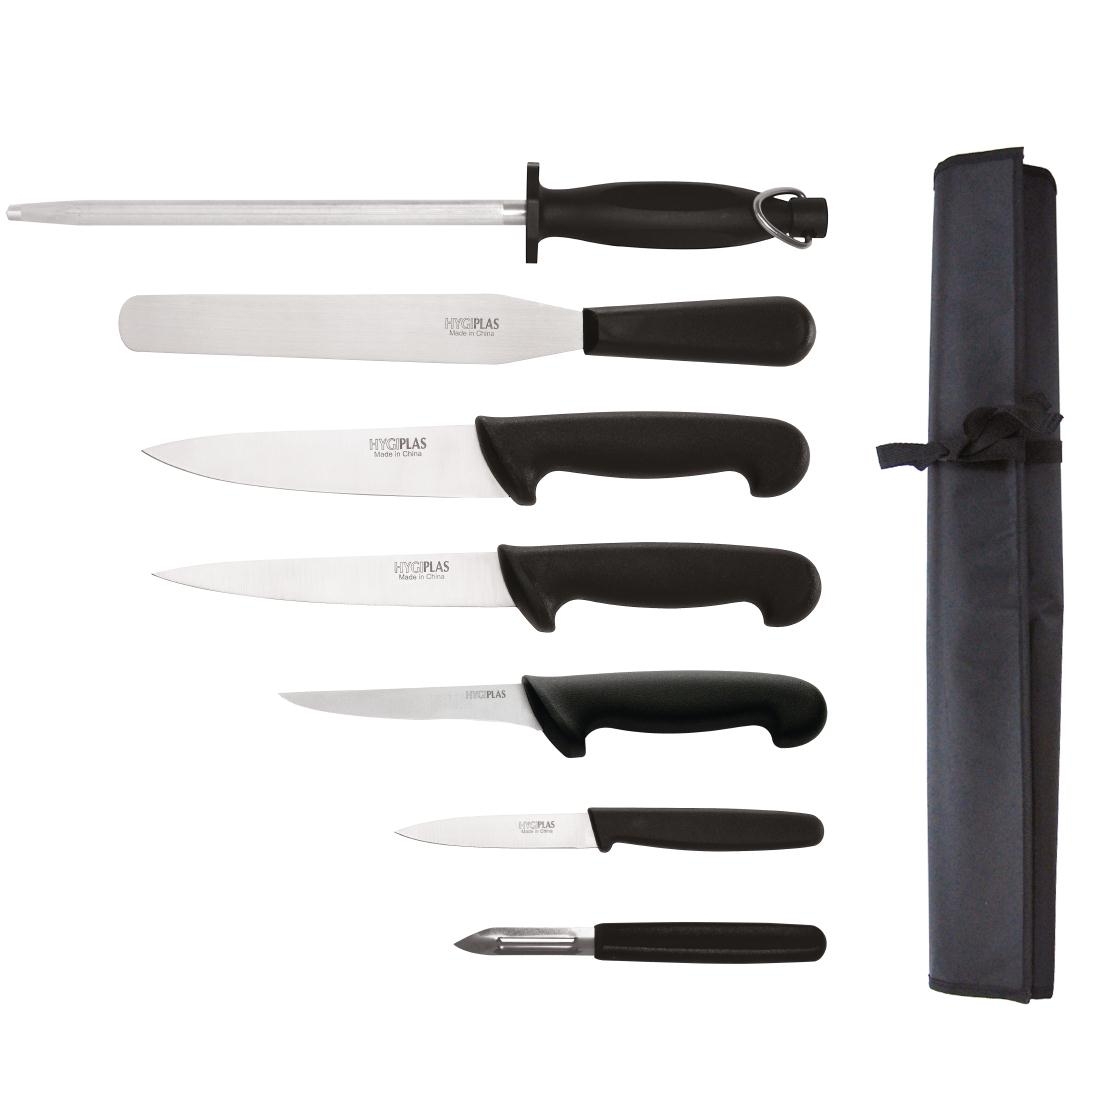 Hygiplas 7 Piece Starter Knife Set With 20cm Chefs Knife and Wallet